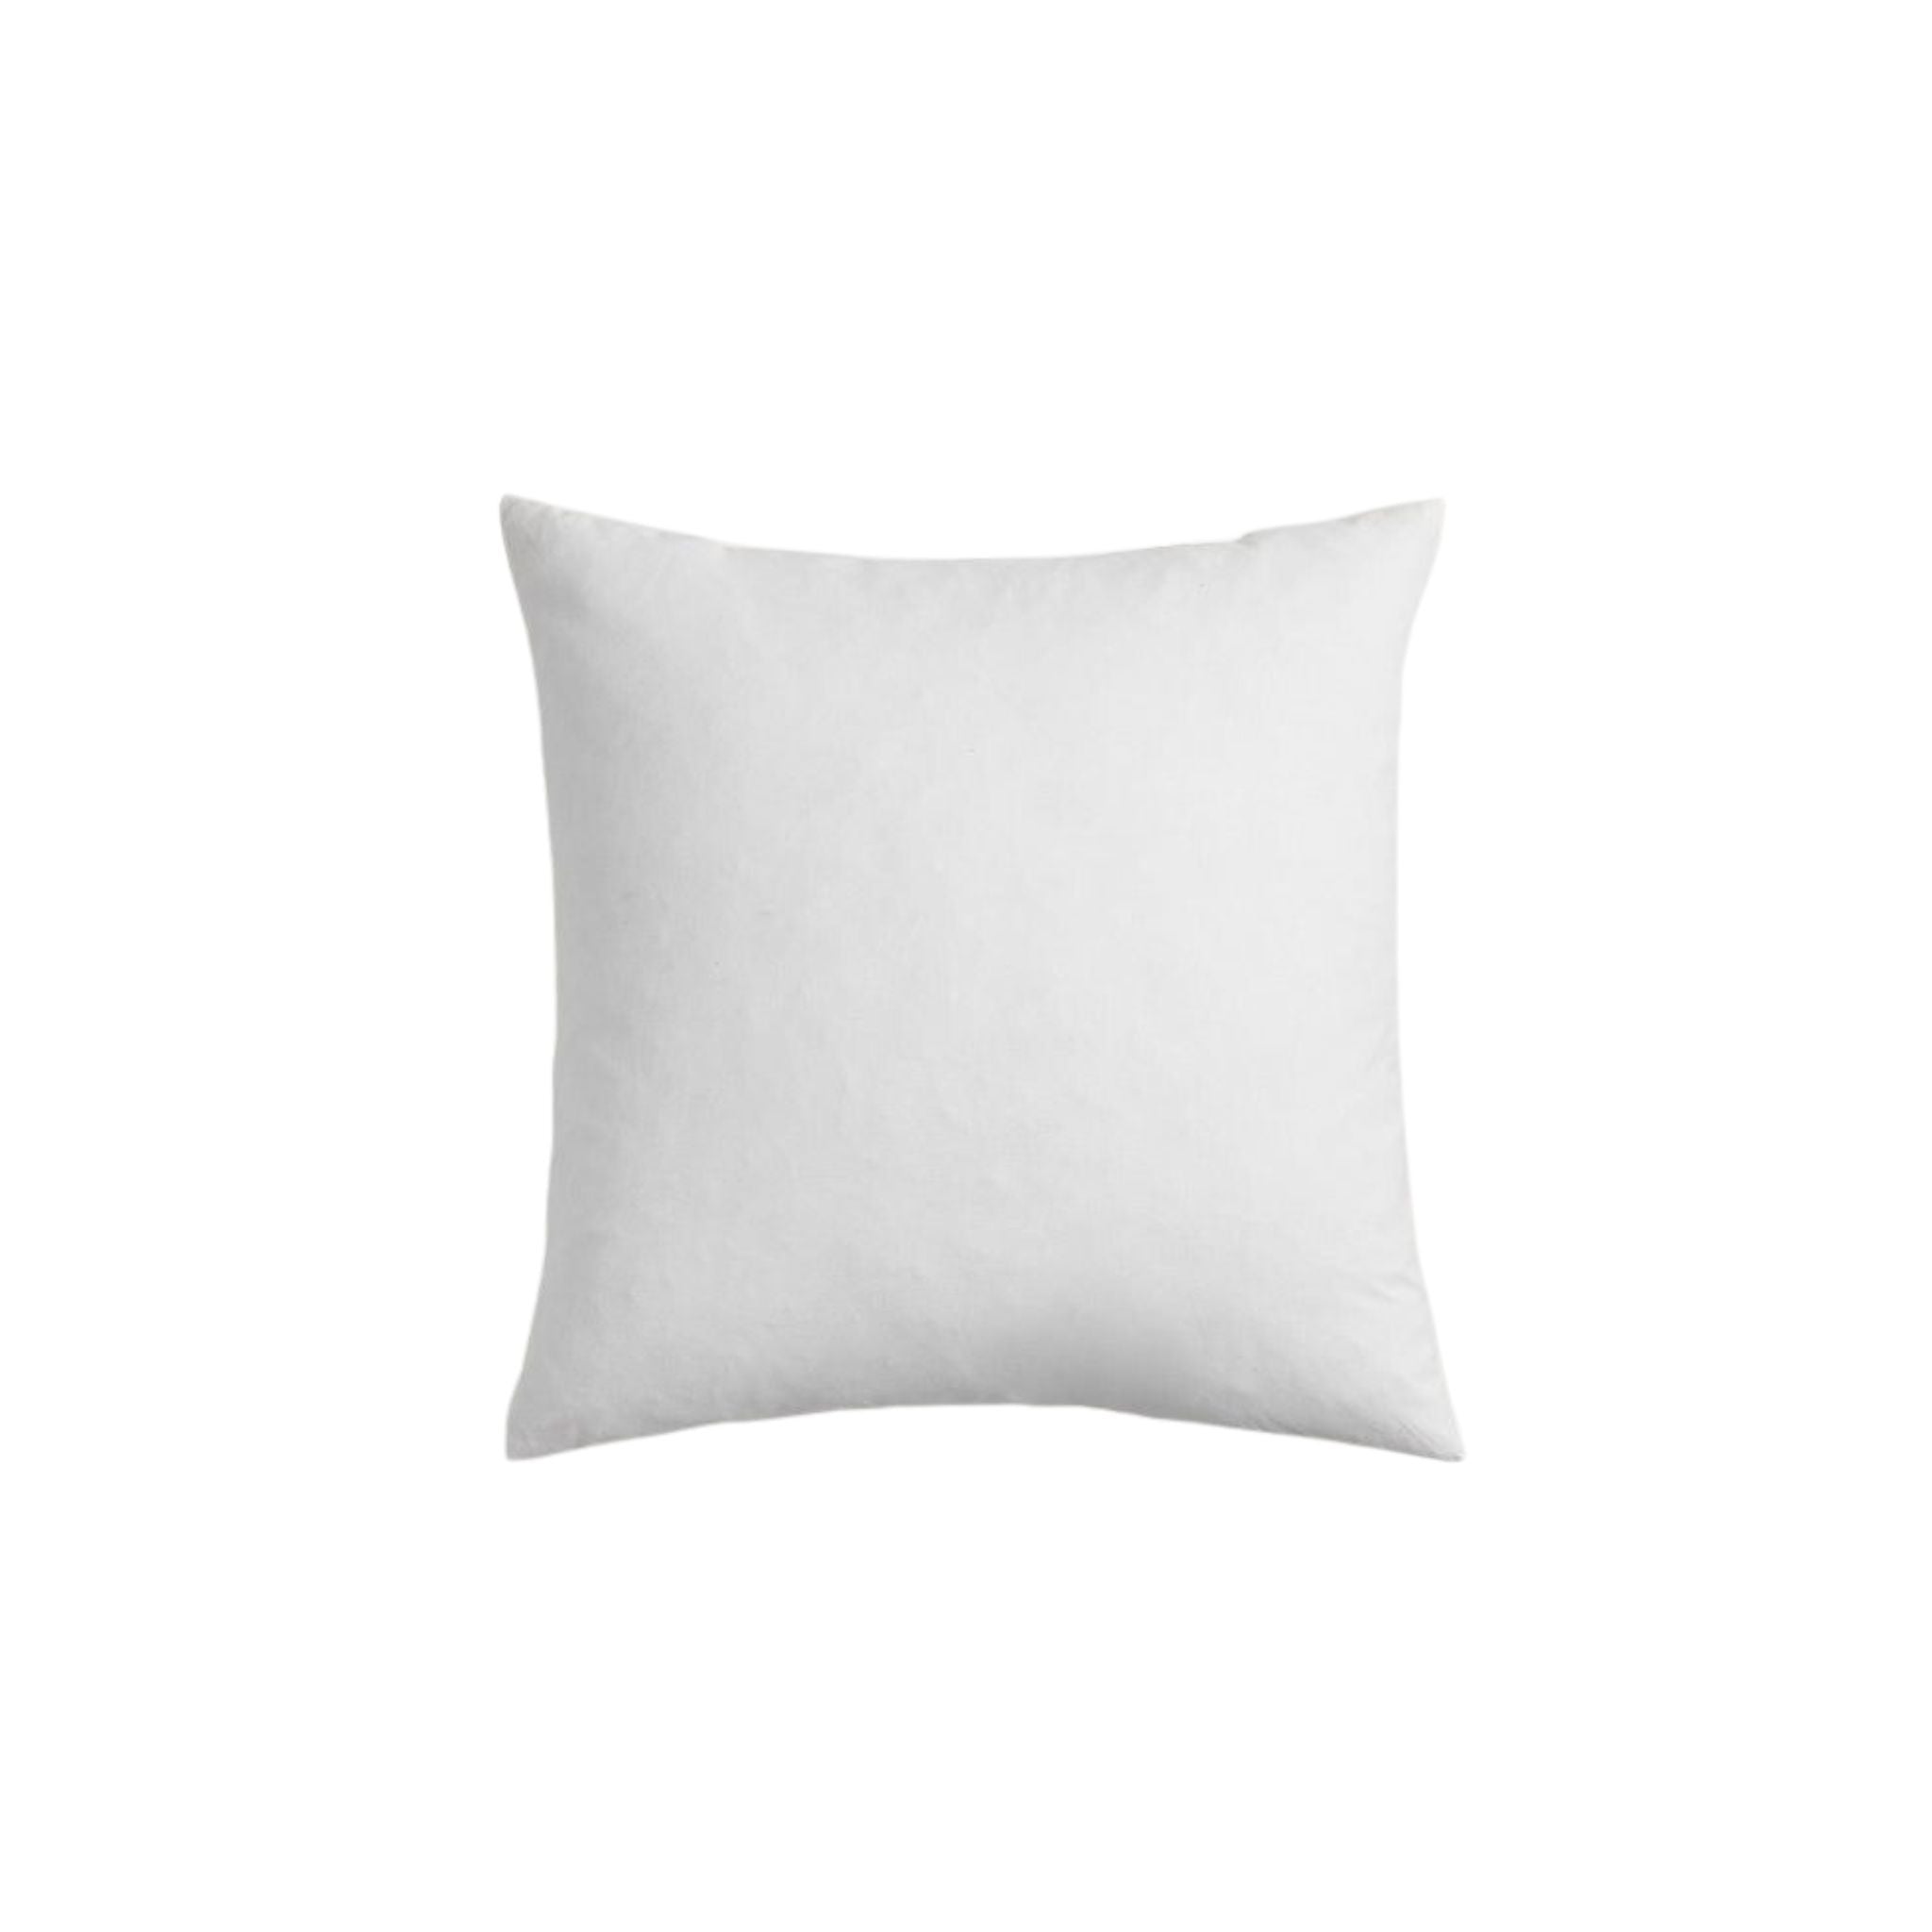 Pillow Insert 24x24 - Simply Elevated Home Furnishings 